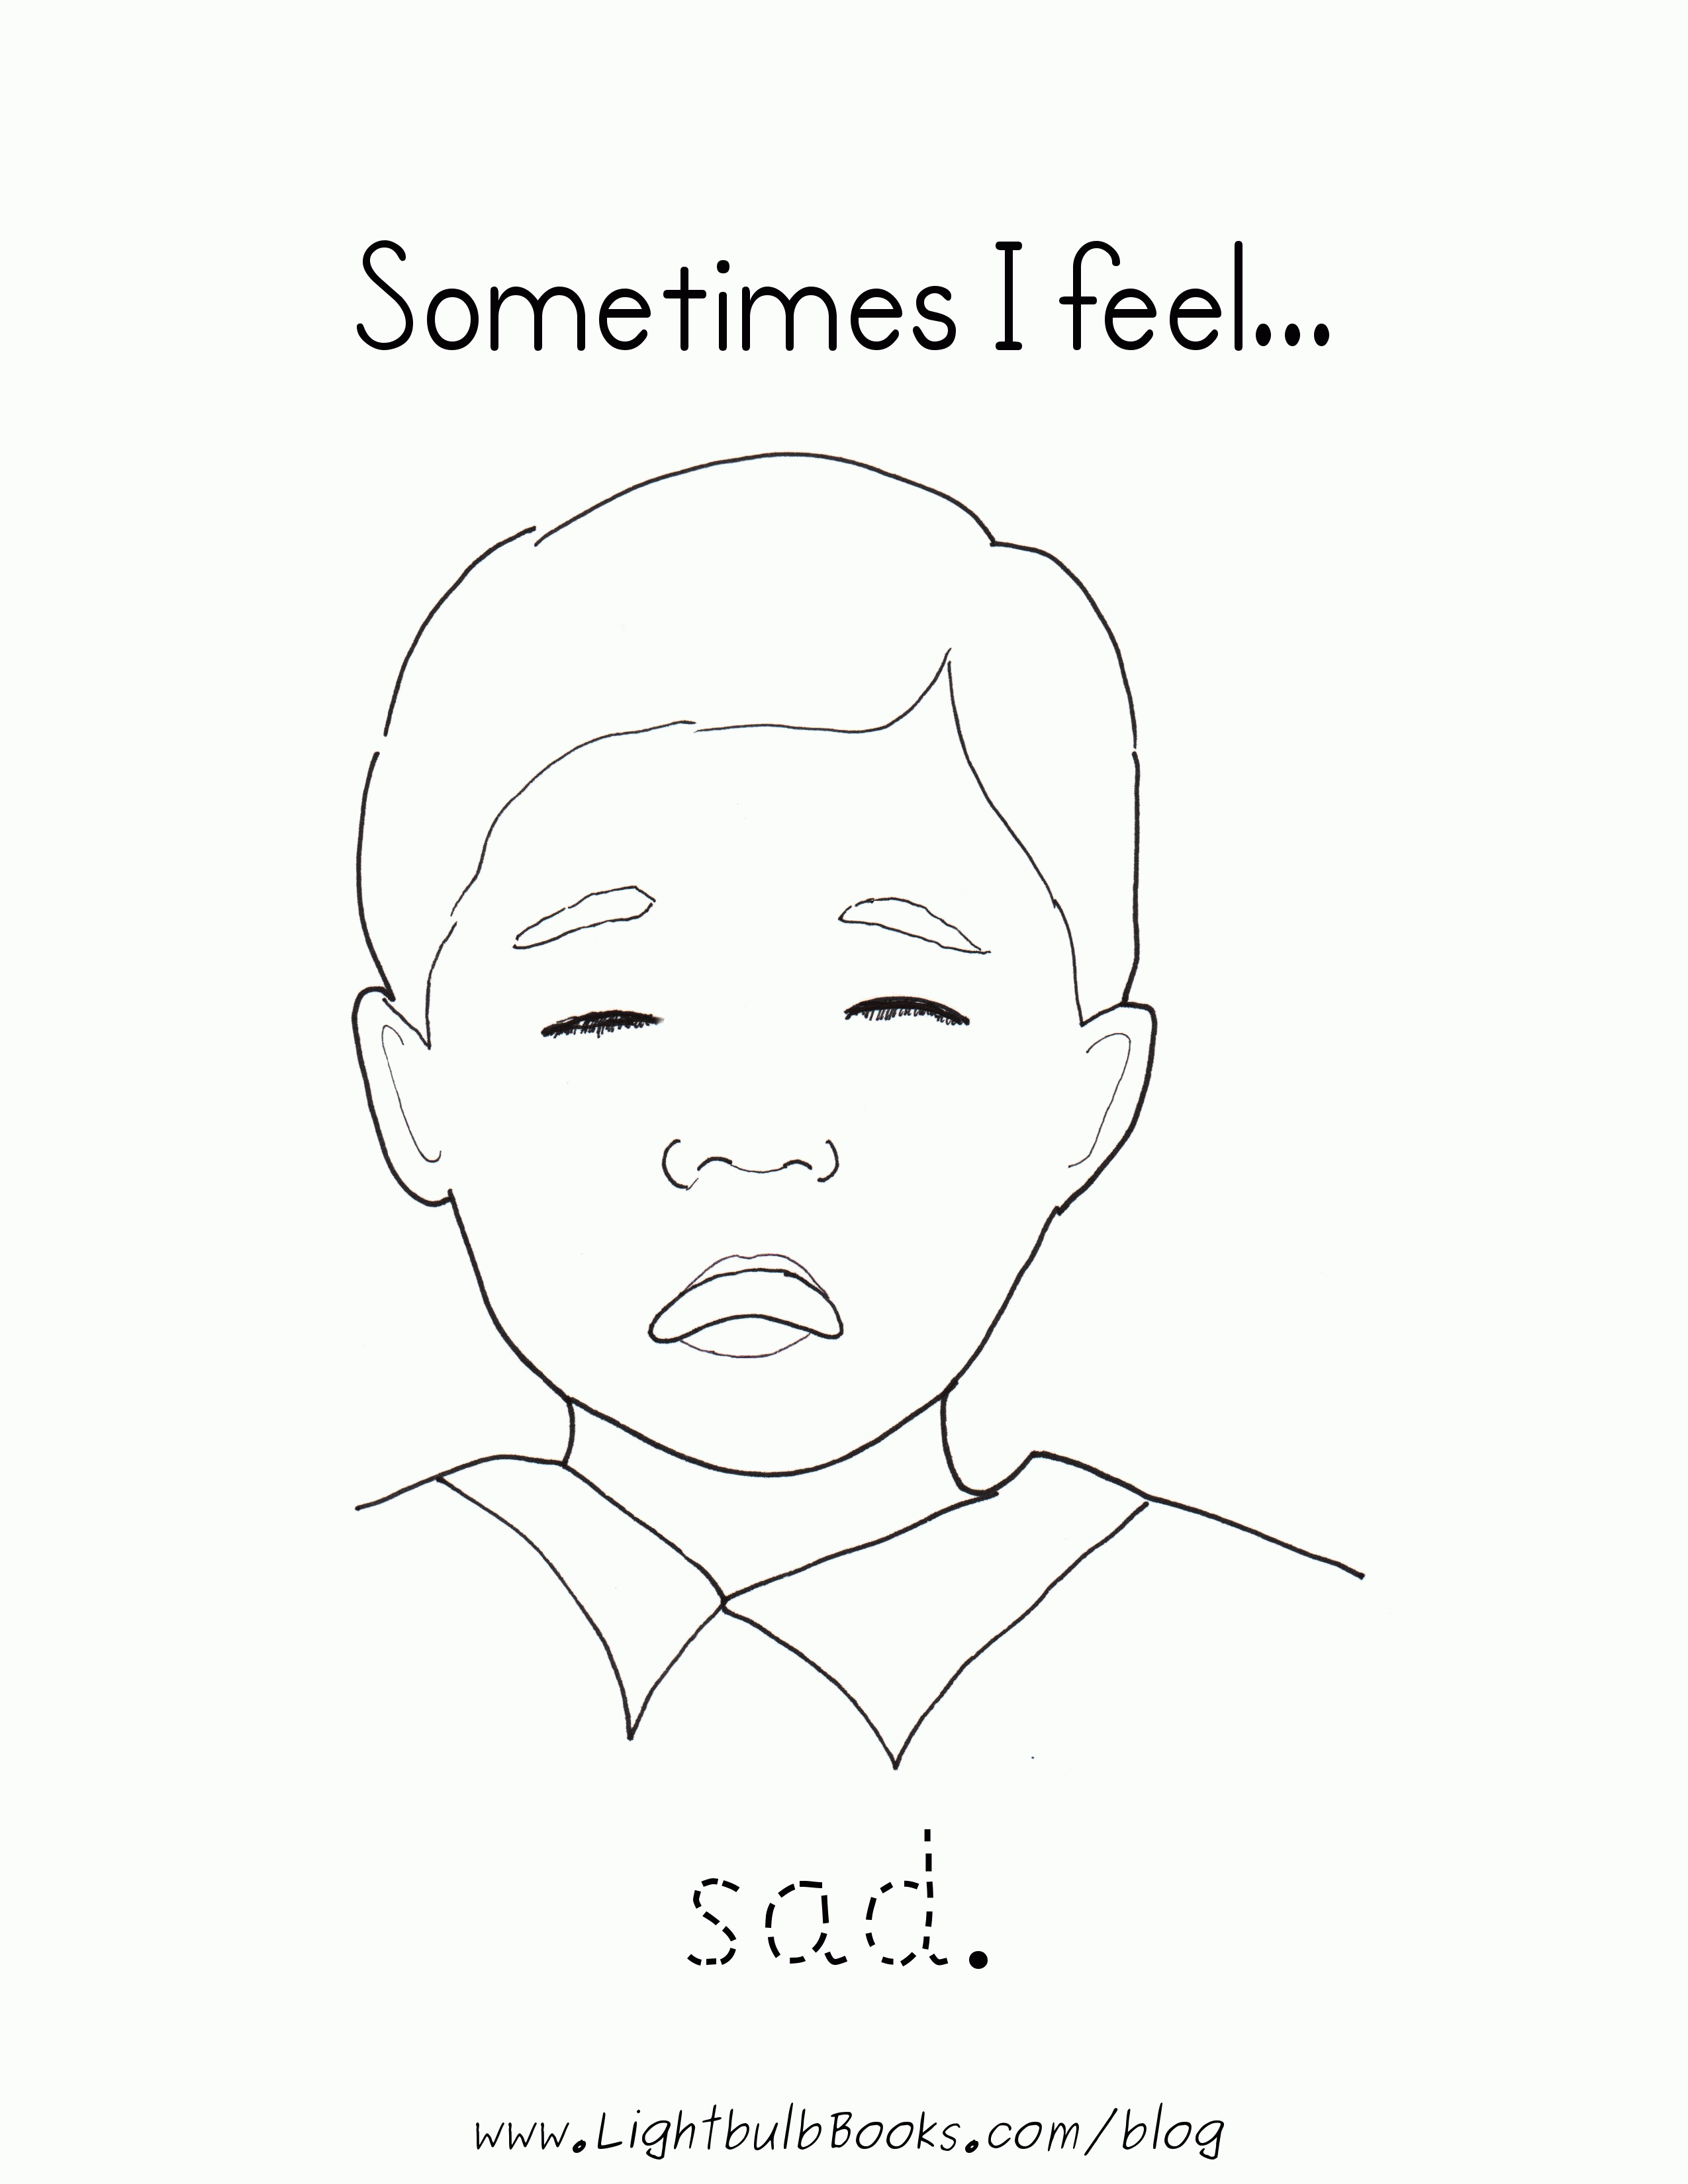 Coloring Page Of A Sad Face - Coloring Home